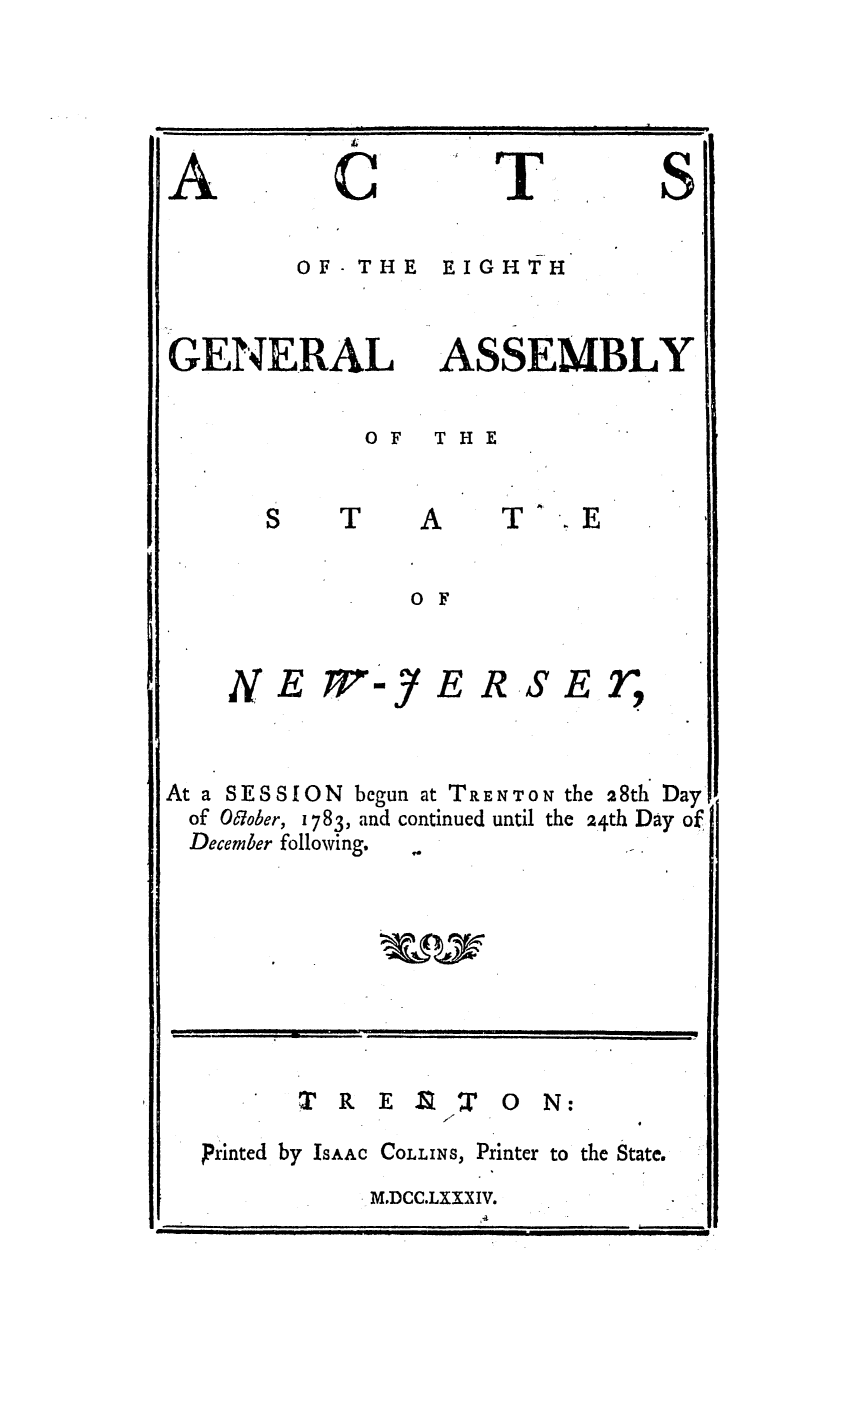 handle is hein.ssl/ssnj0239 and id is 1 raw text is: A

T

S OF- THE
GENERAL

S

EIGHTH
ASSEMBLY

OF  THE

0 F

M )

E

SET,

At a SESSION begun at TRENTON the 28th Day
of Oiober, 1783, and continued until the 24th Day of
December following.

ST R E                0 N:
printed by IsAAc COLLINS, Printer to the State.

MDCC.LXXX IV.

N

E

R

i~i IJJw

i                                                                              I   lli  n   II               I      II        P                                -       -        I                         --                                     I I
--                                                                -                                                                                   .                                      I                            Jl                   n n


